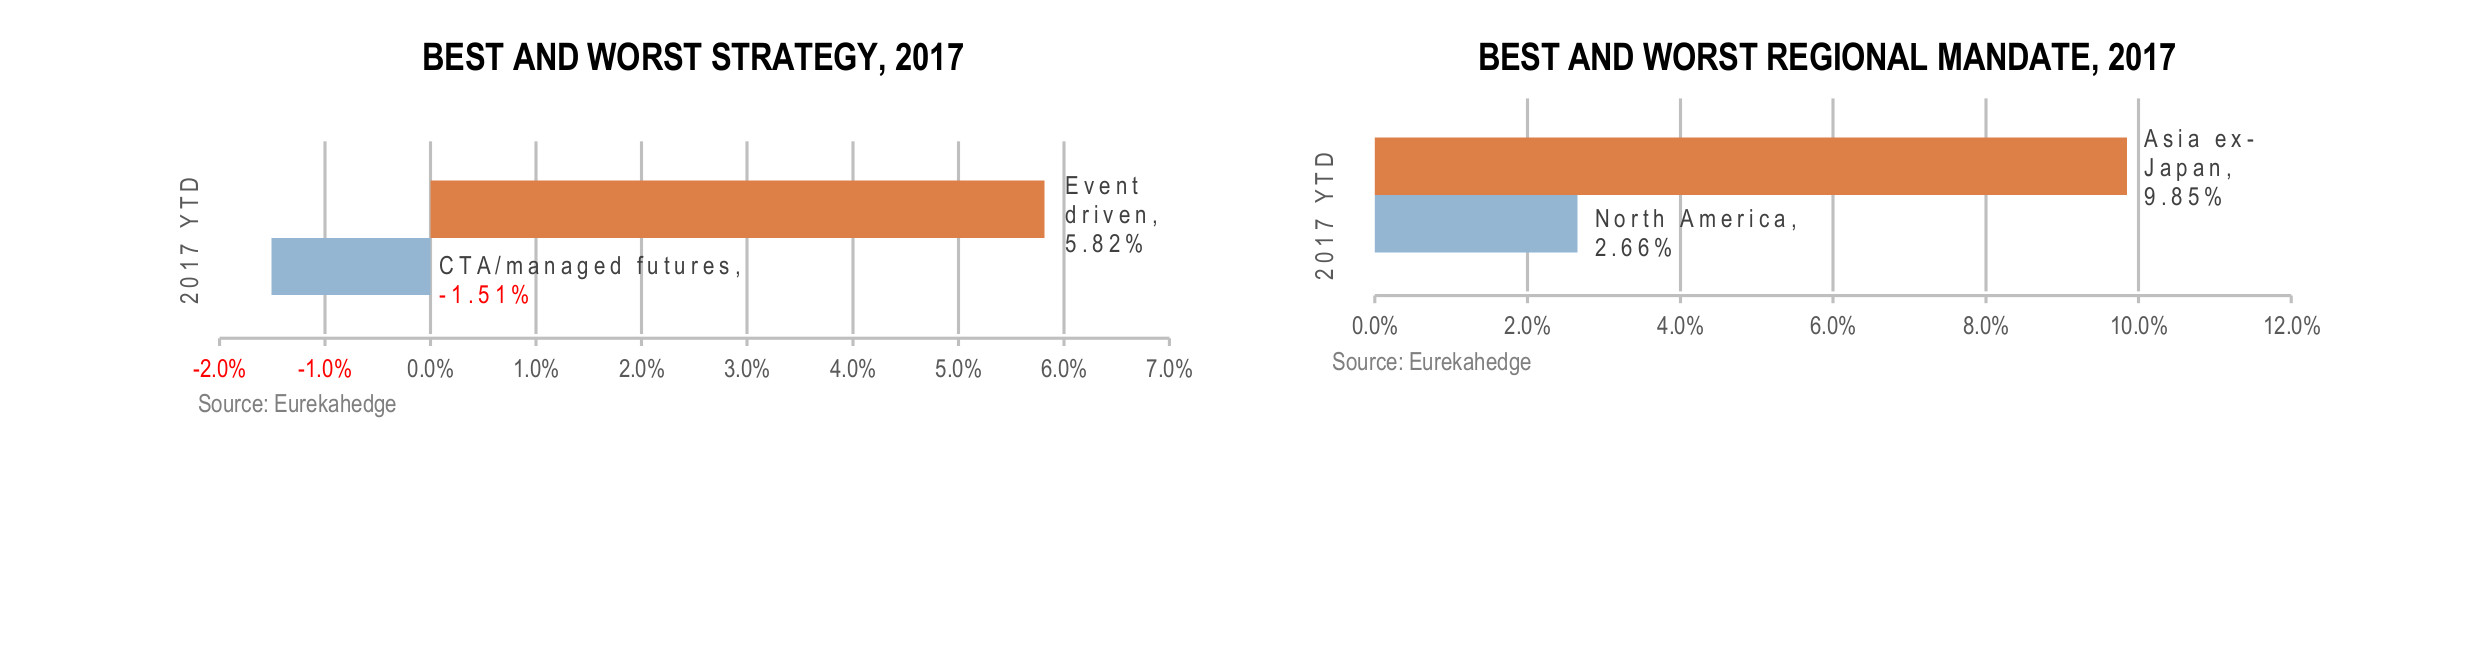 Global Hedge Fund Infographic August 2017 - best worst strategy and regional mandate